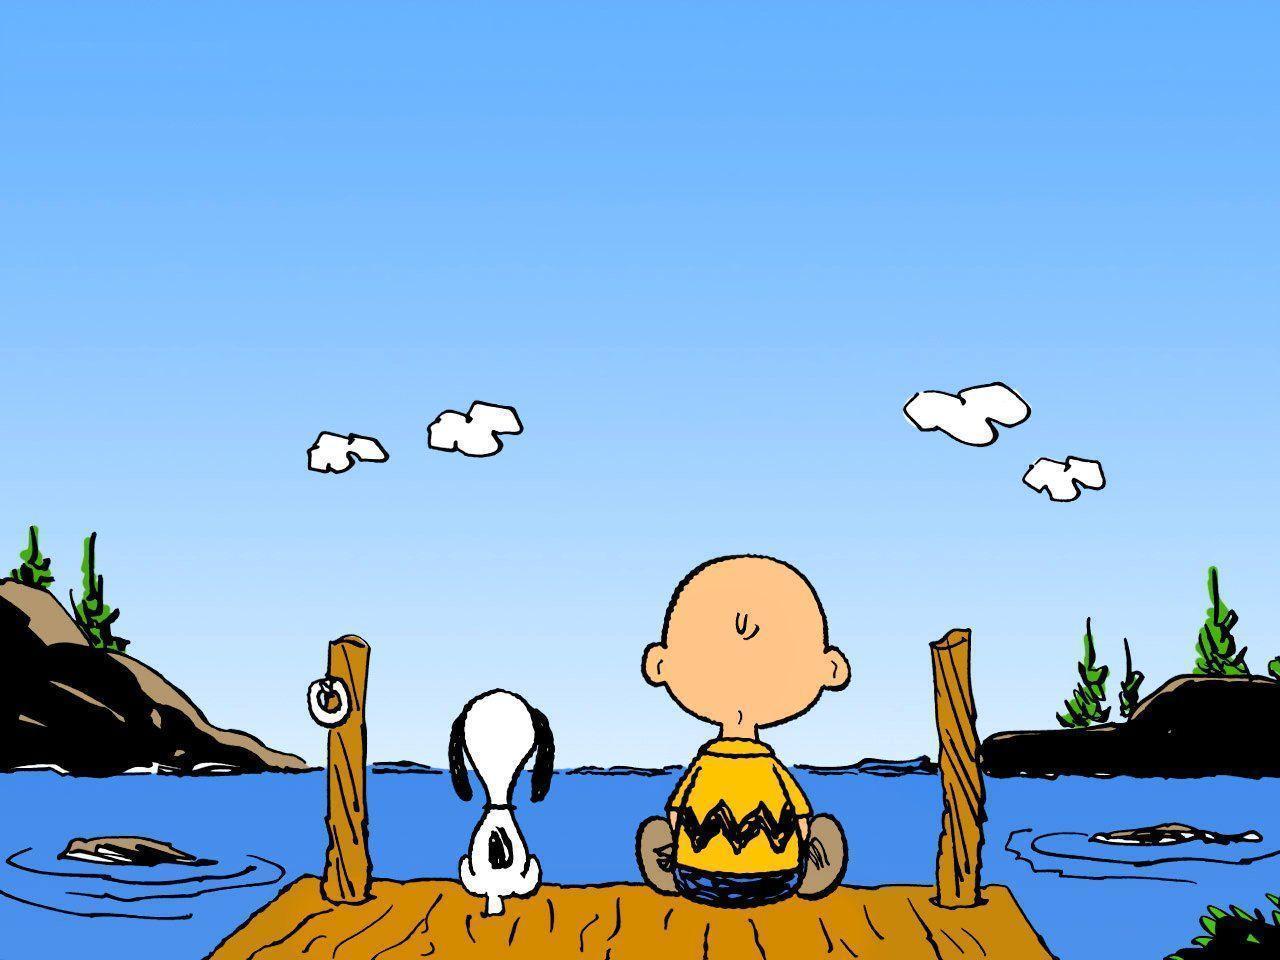 Download Snoopy Charlie Wallpaper 1280x960